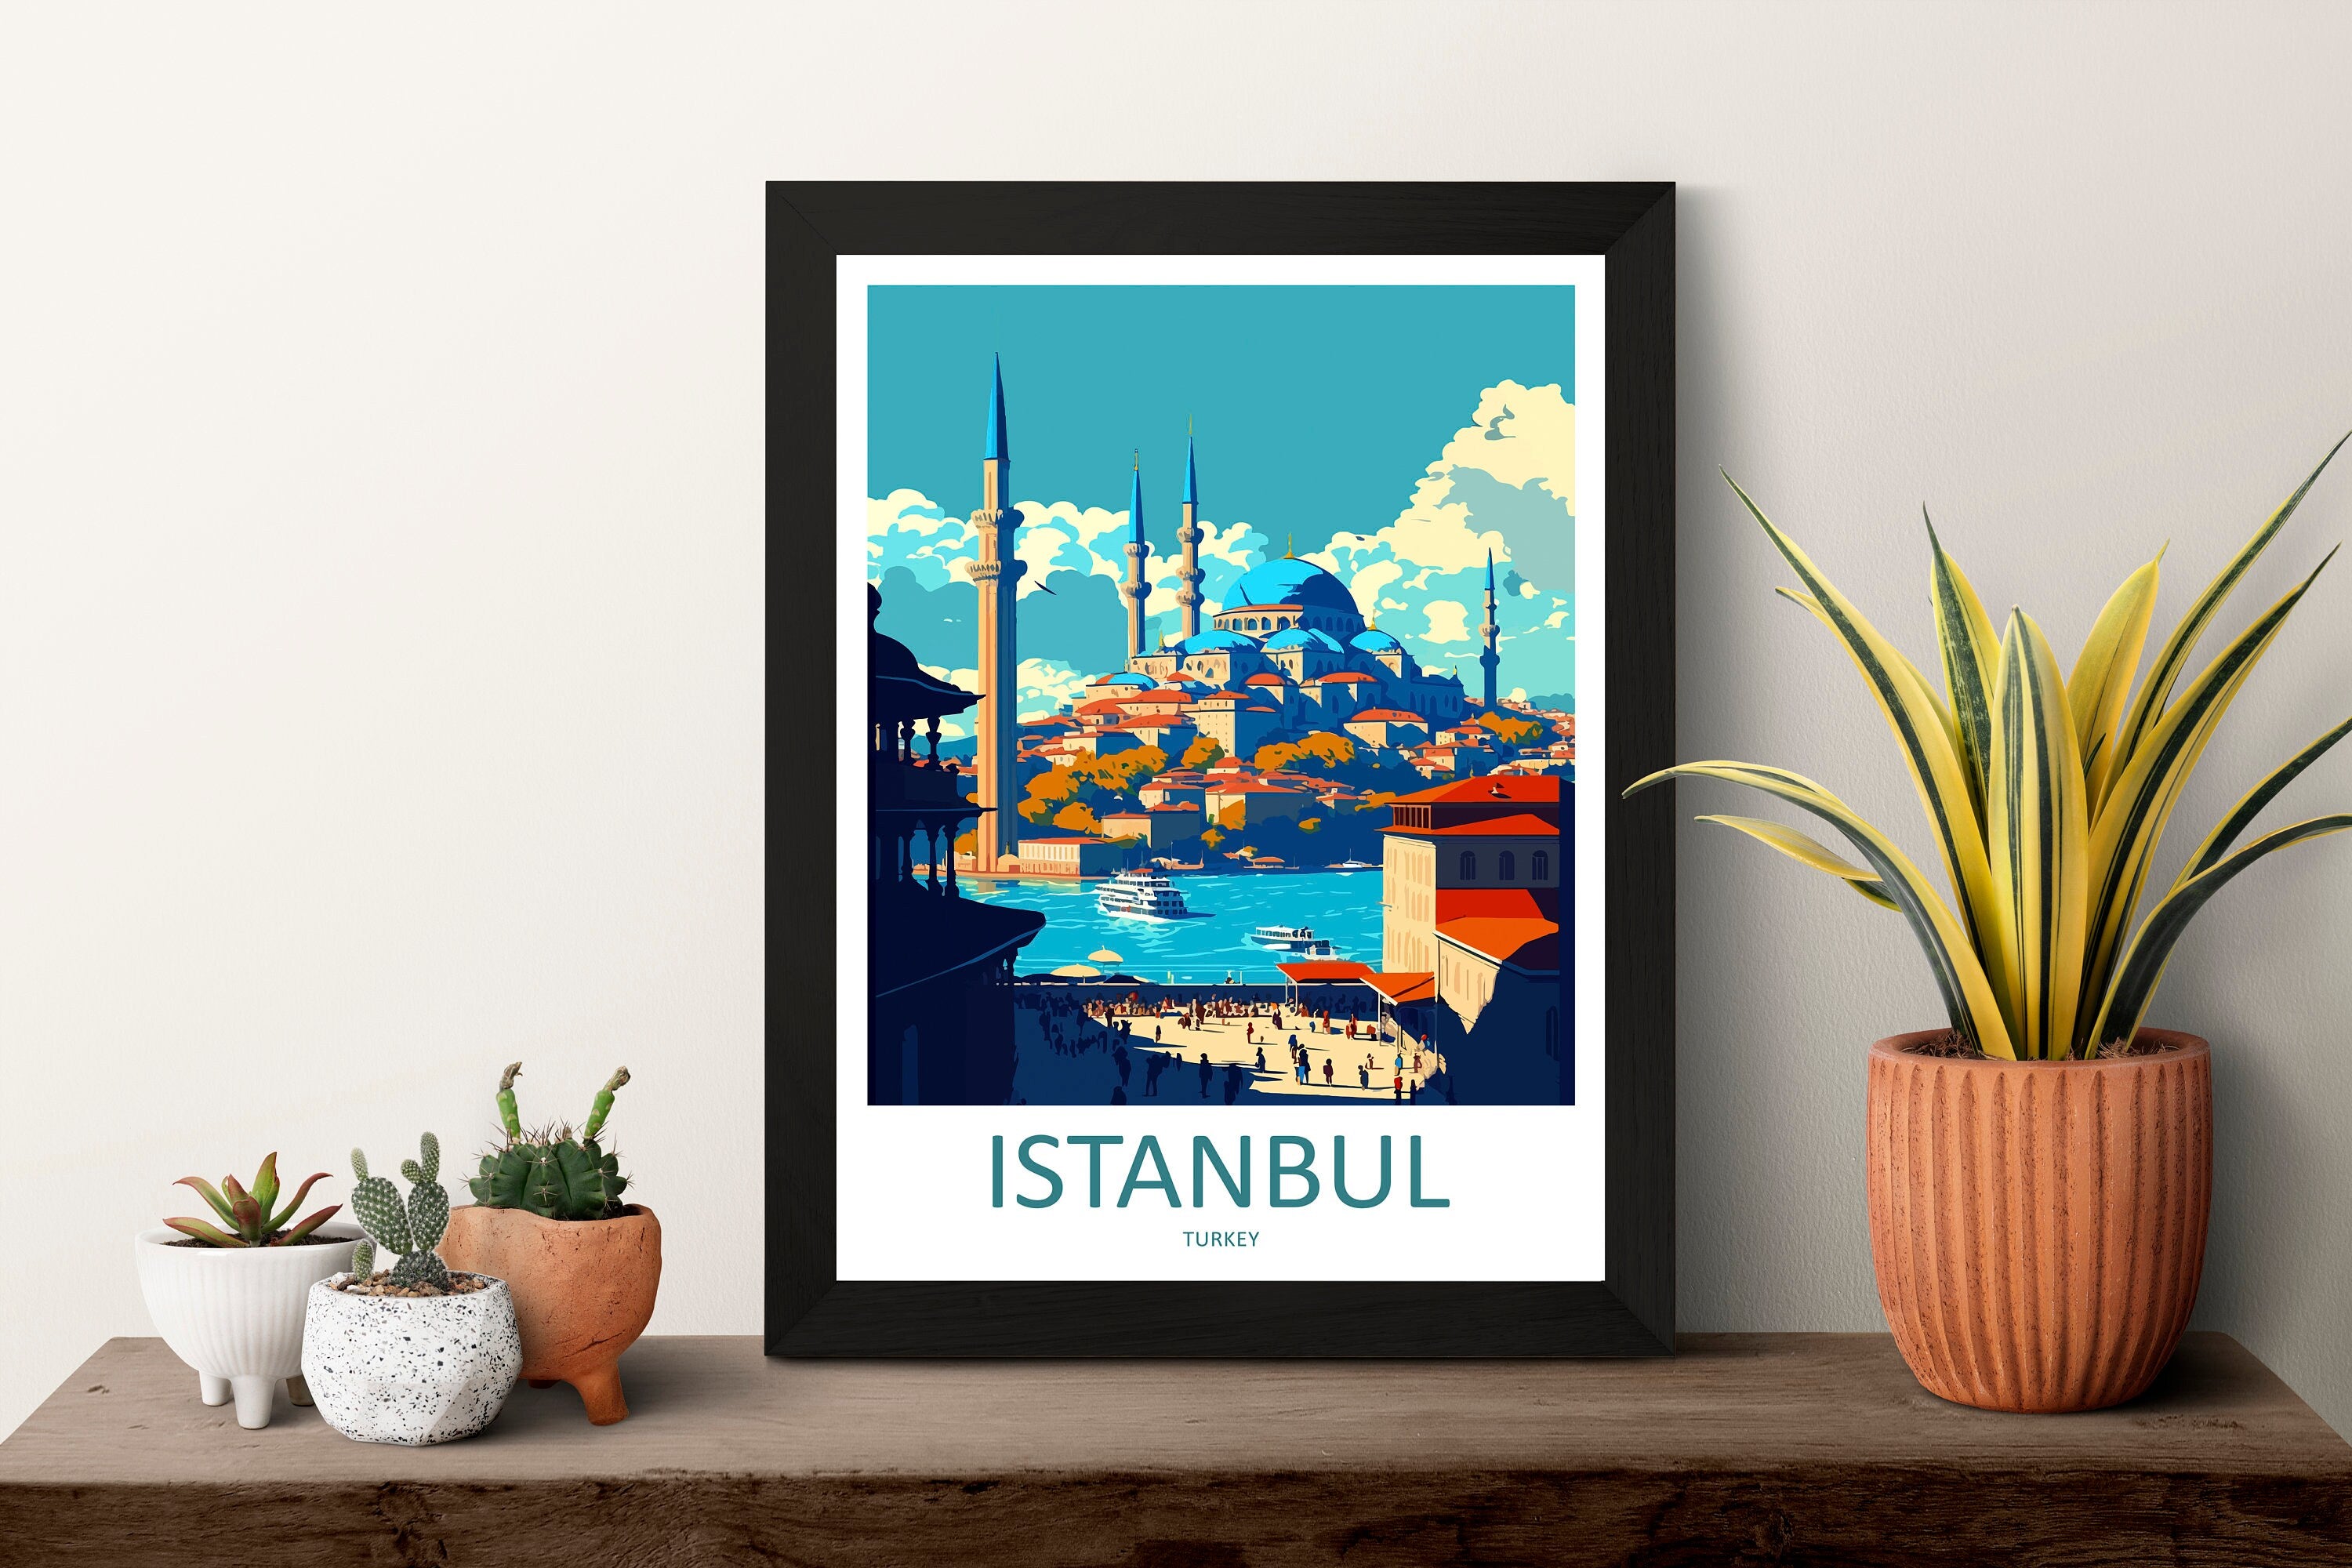 Istanbul Travel Print Wall Art Istanbul Wall Hanging Home Decoration Istanbul Gift Art Lovers Wall Art Print Art Istanbul Wall Print Turkey